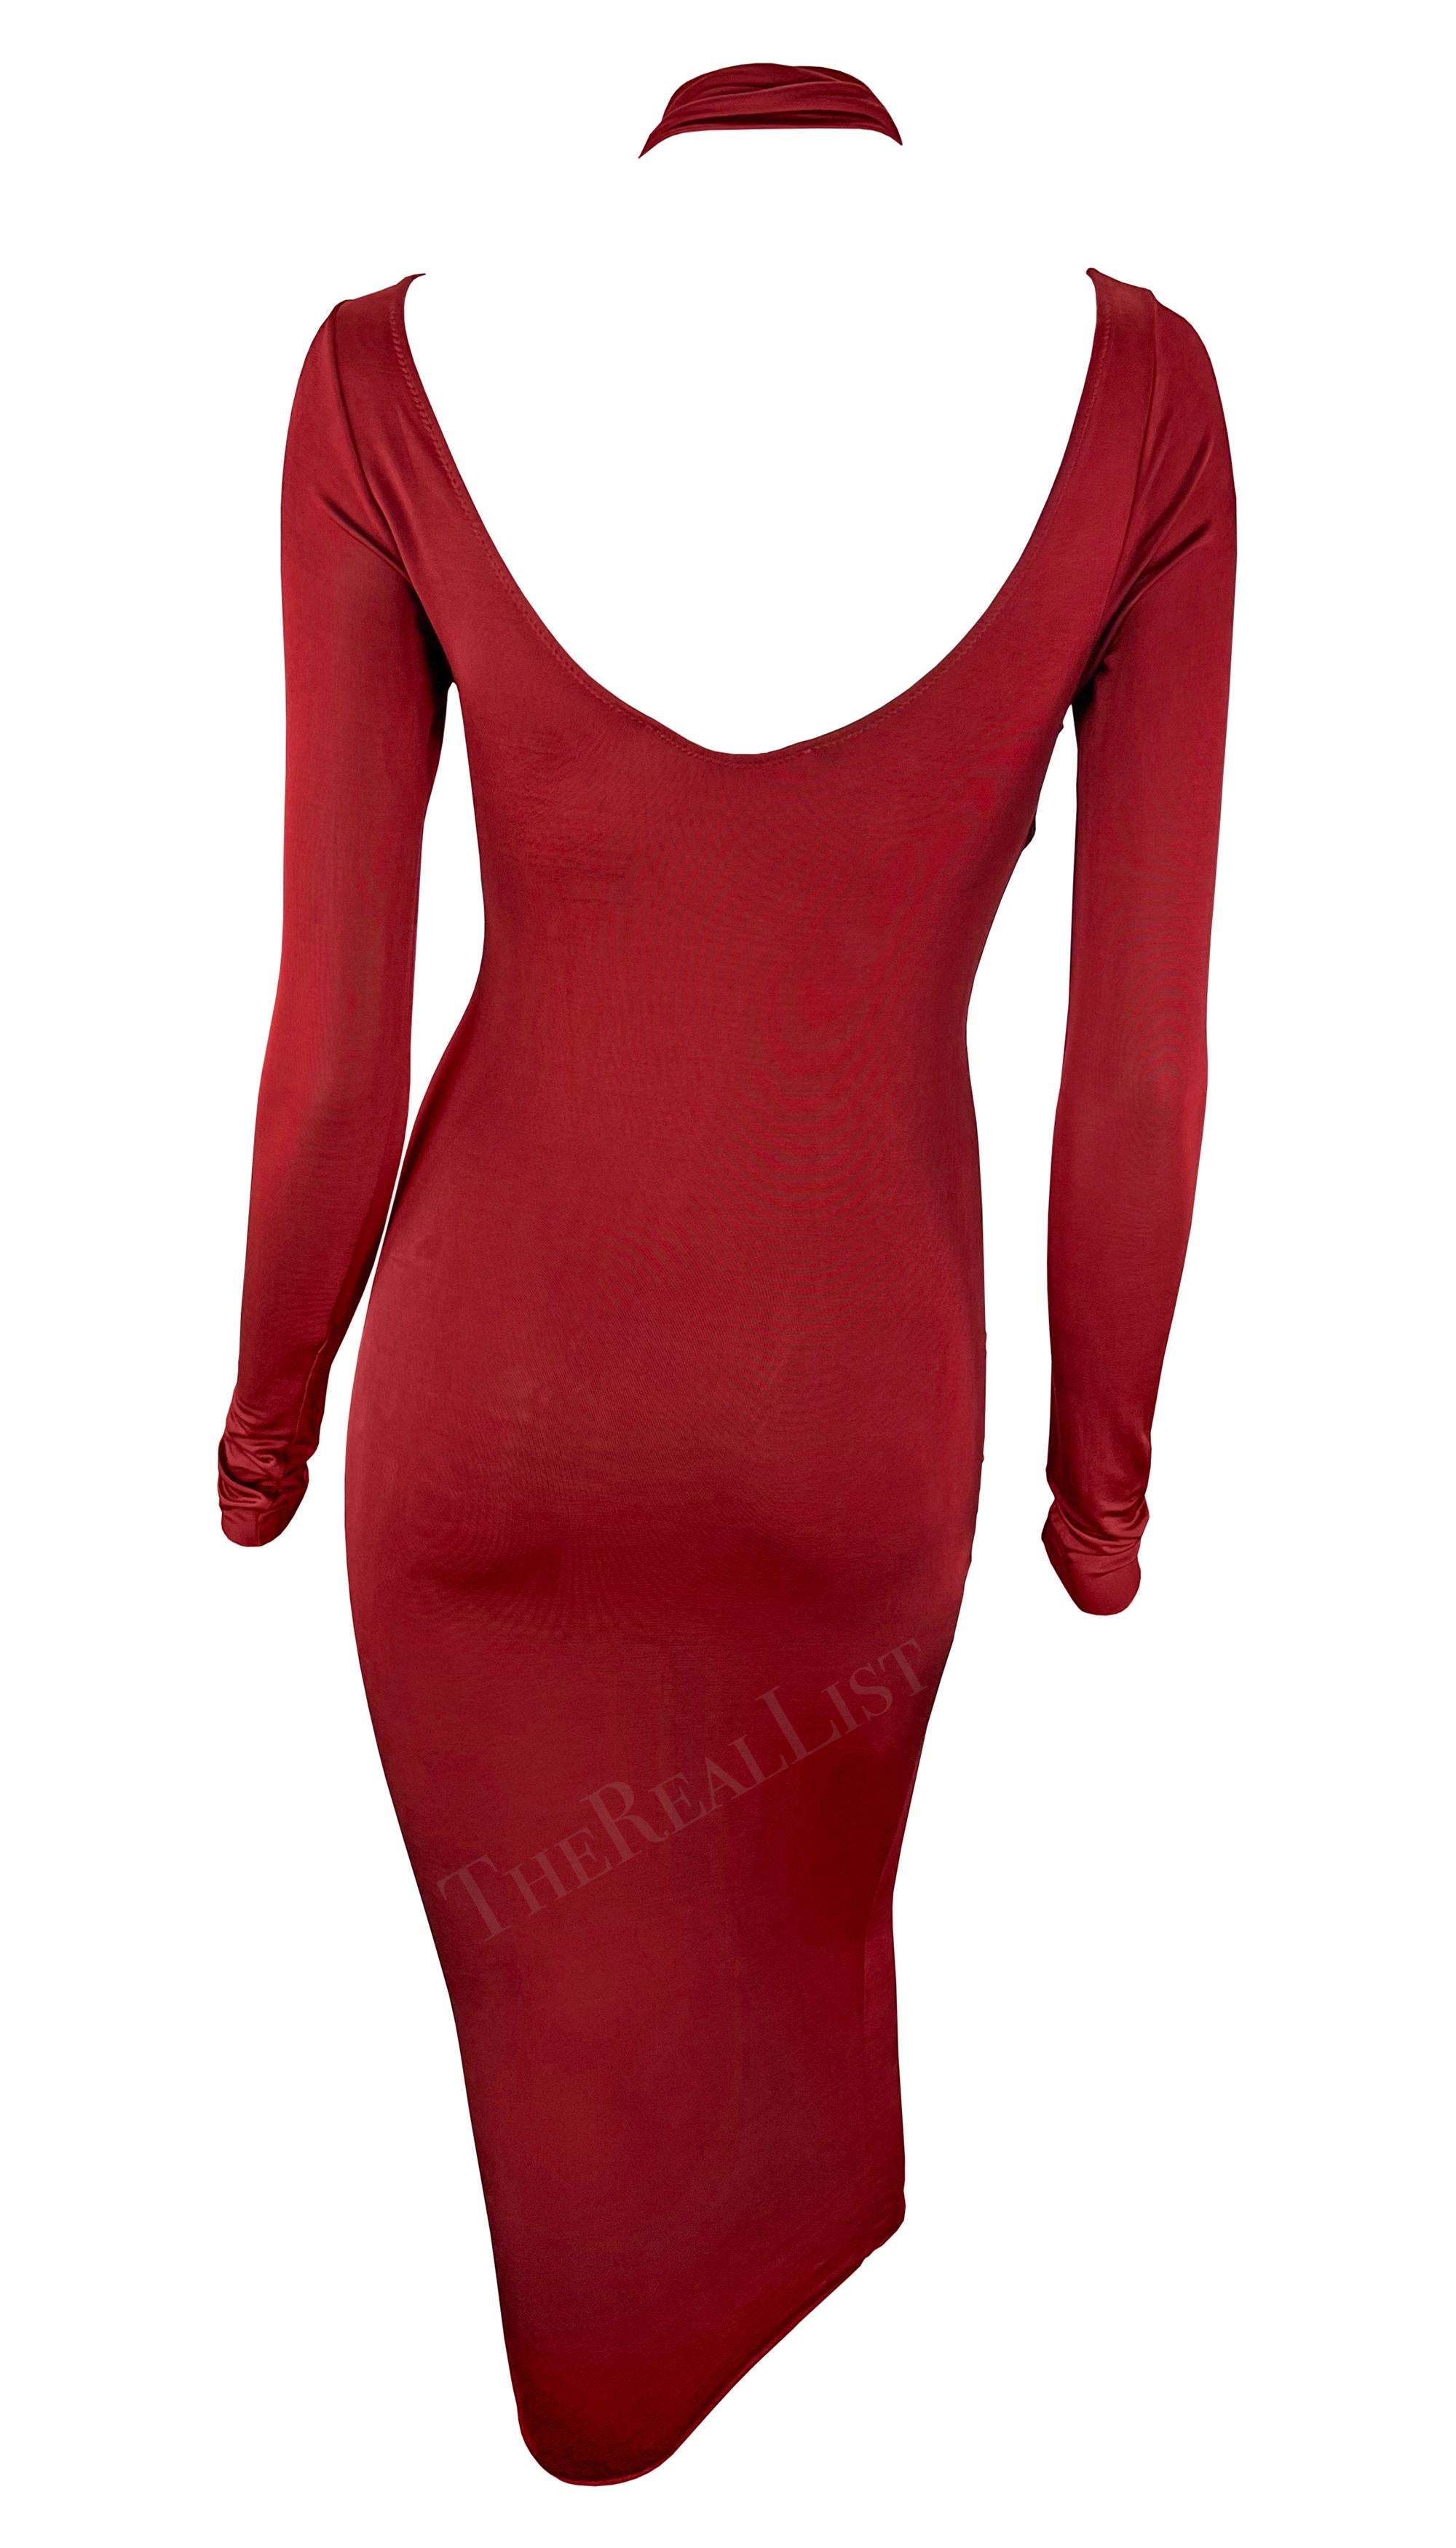 F/W 2003 Gucci by Tom Ford Red Bondage Strap Convertible Stretch Bodycon Dress For Sale 1